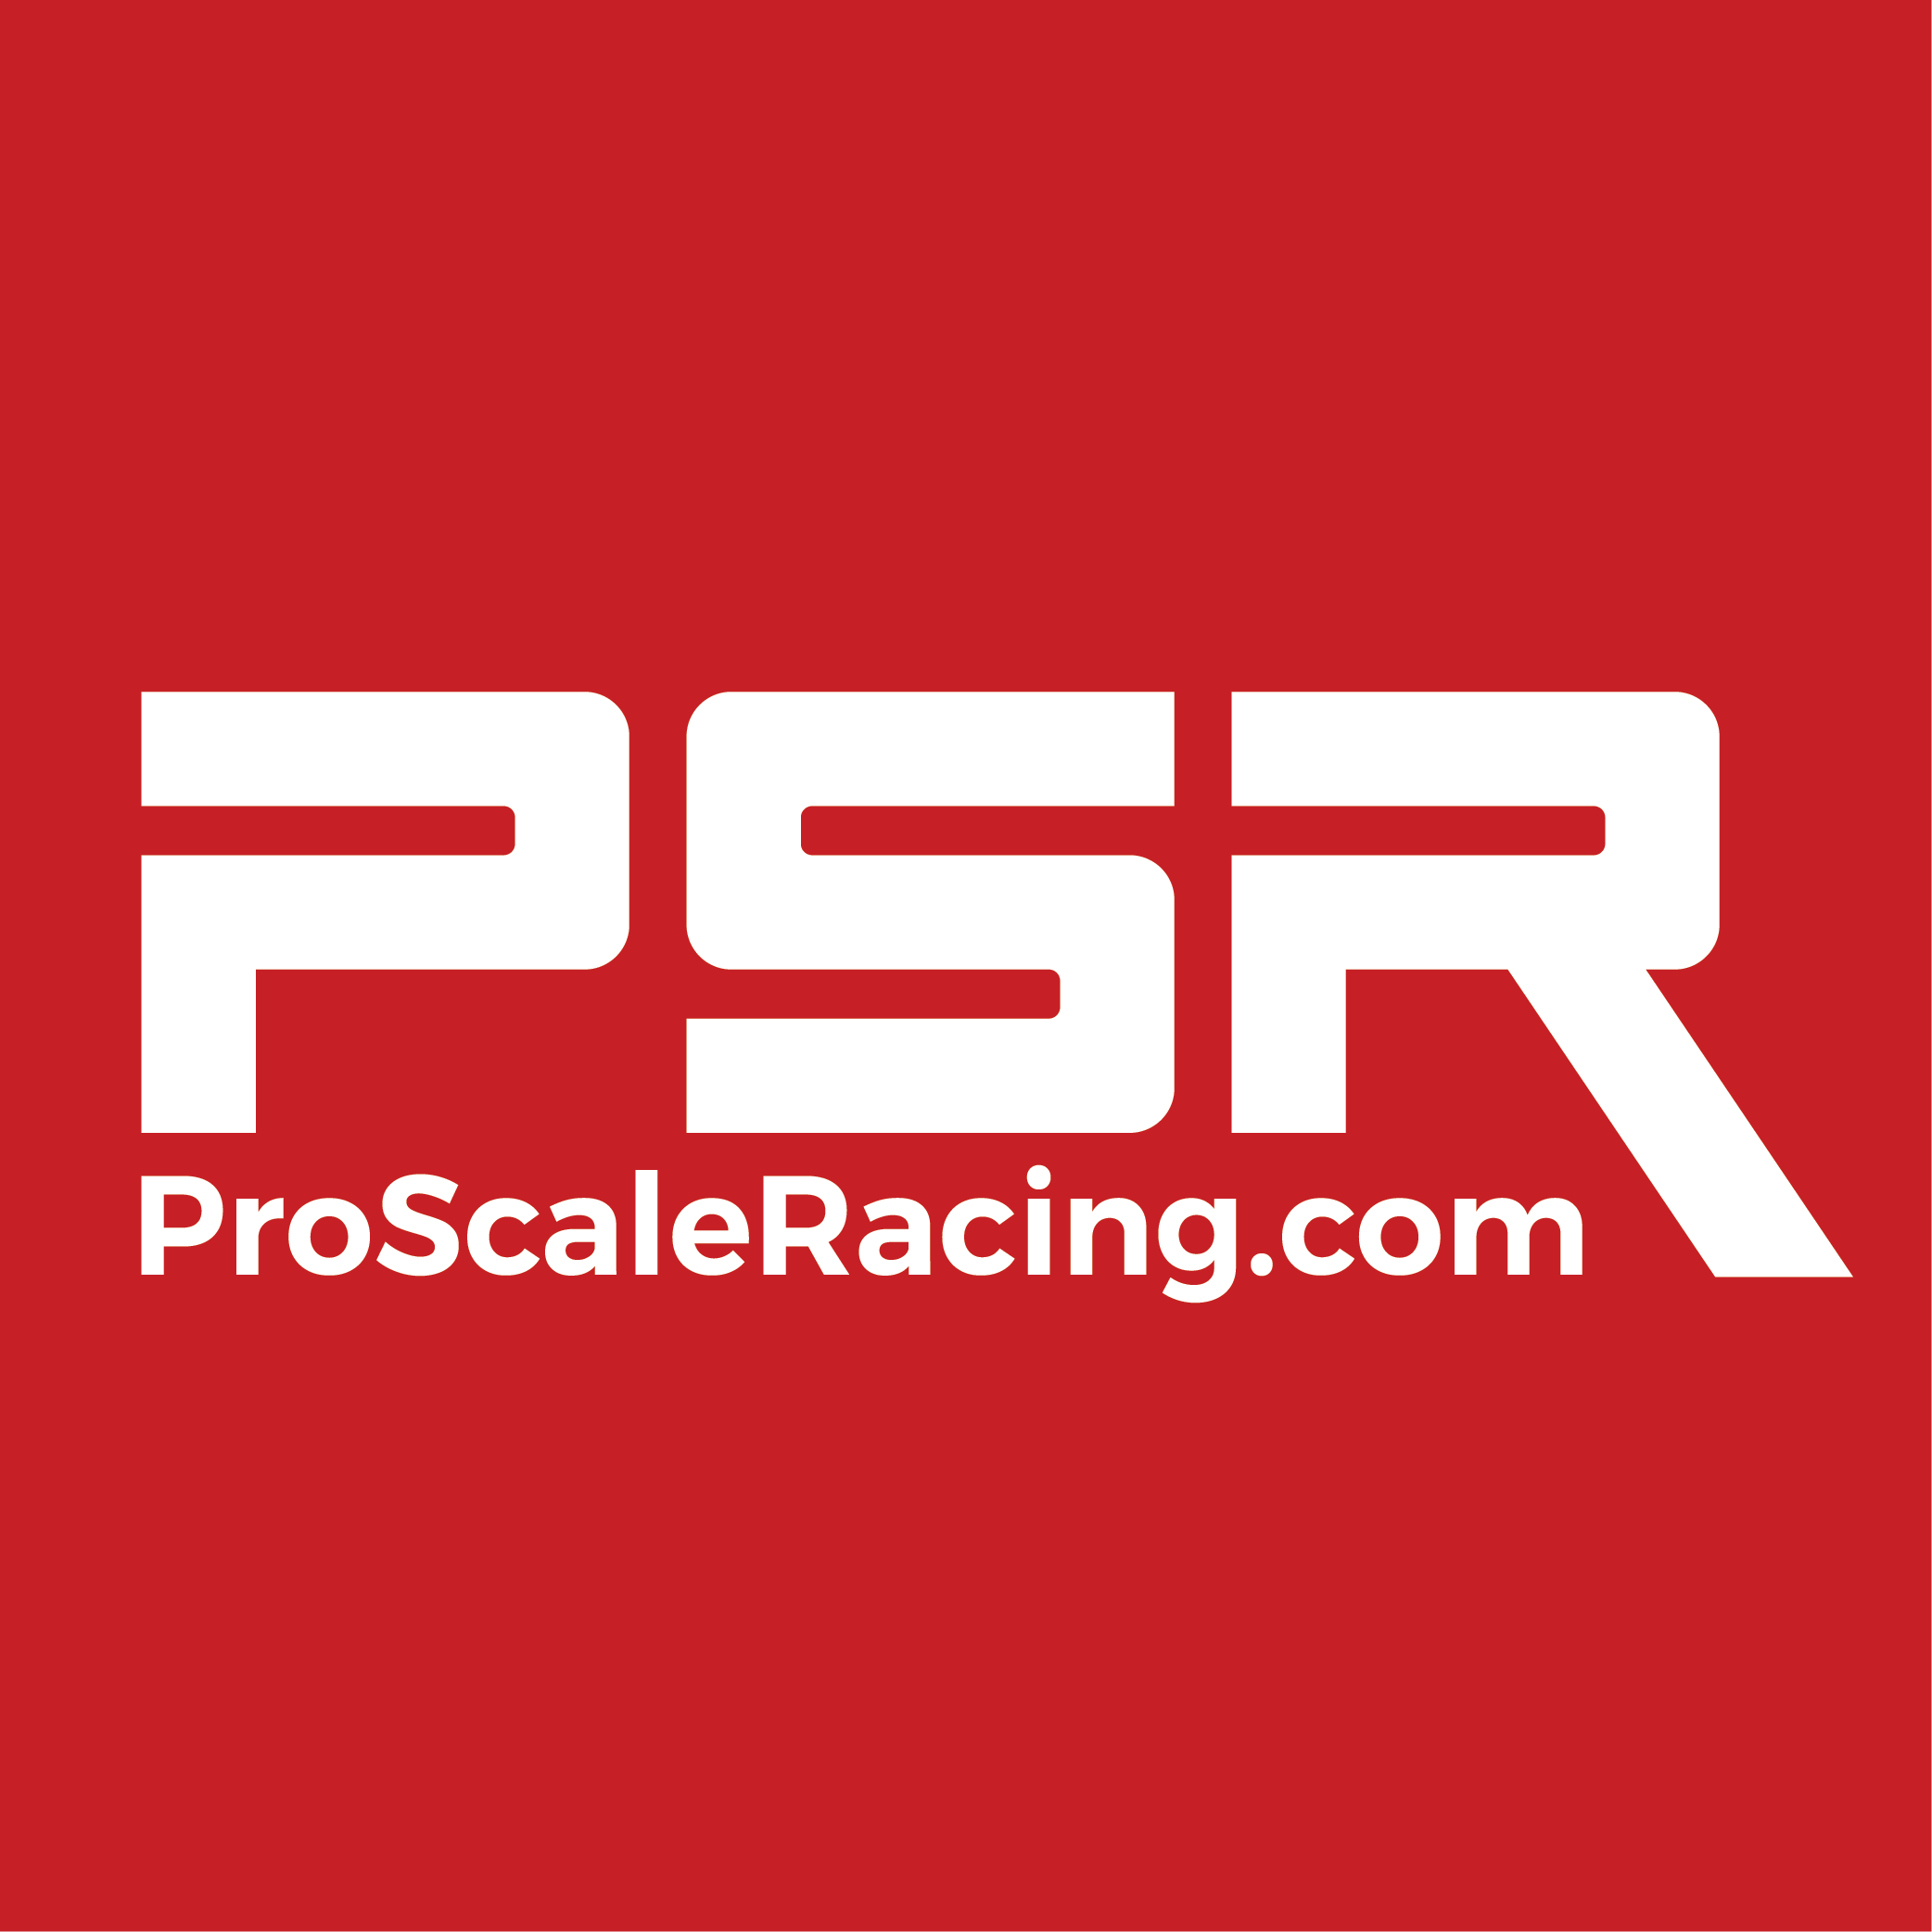 PSR Logo - ProScale Racing slot racing products and services